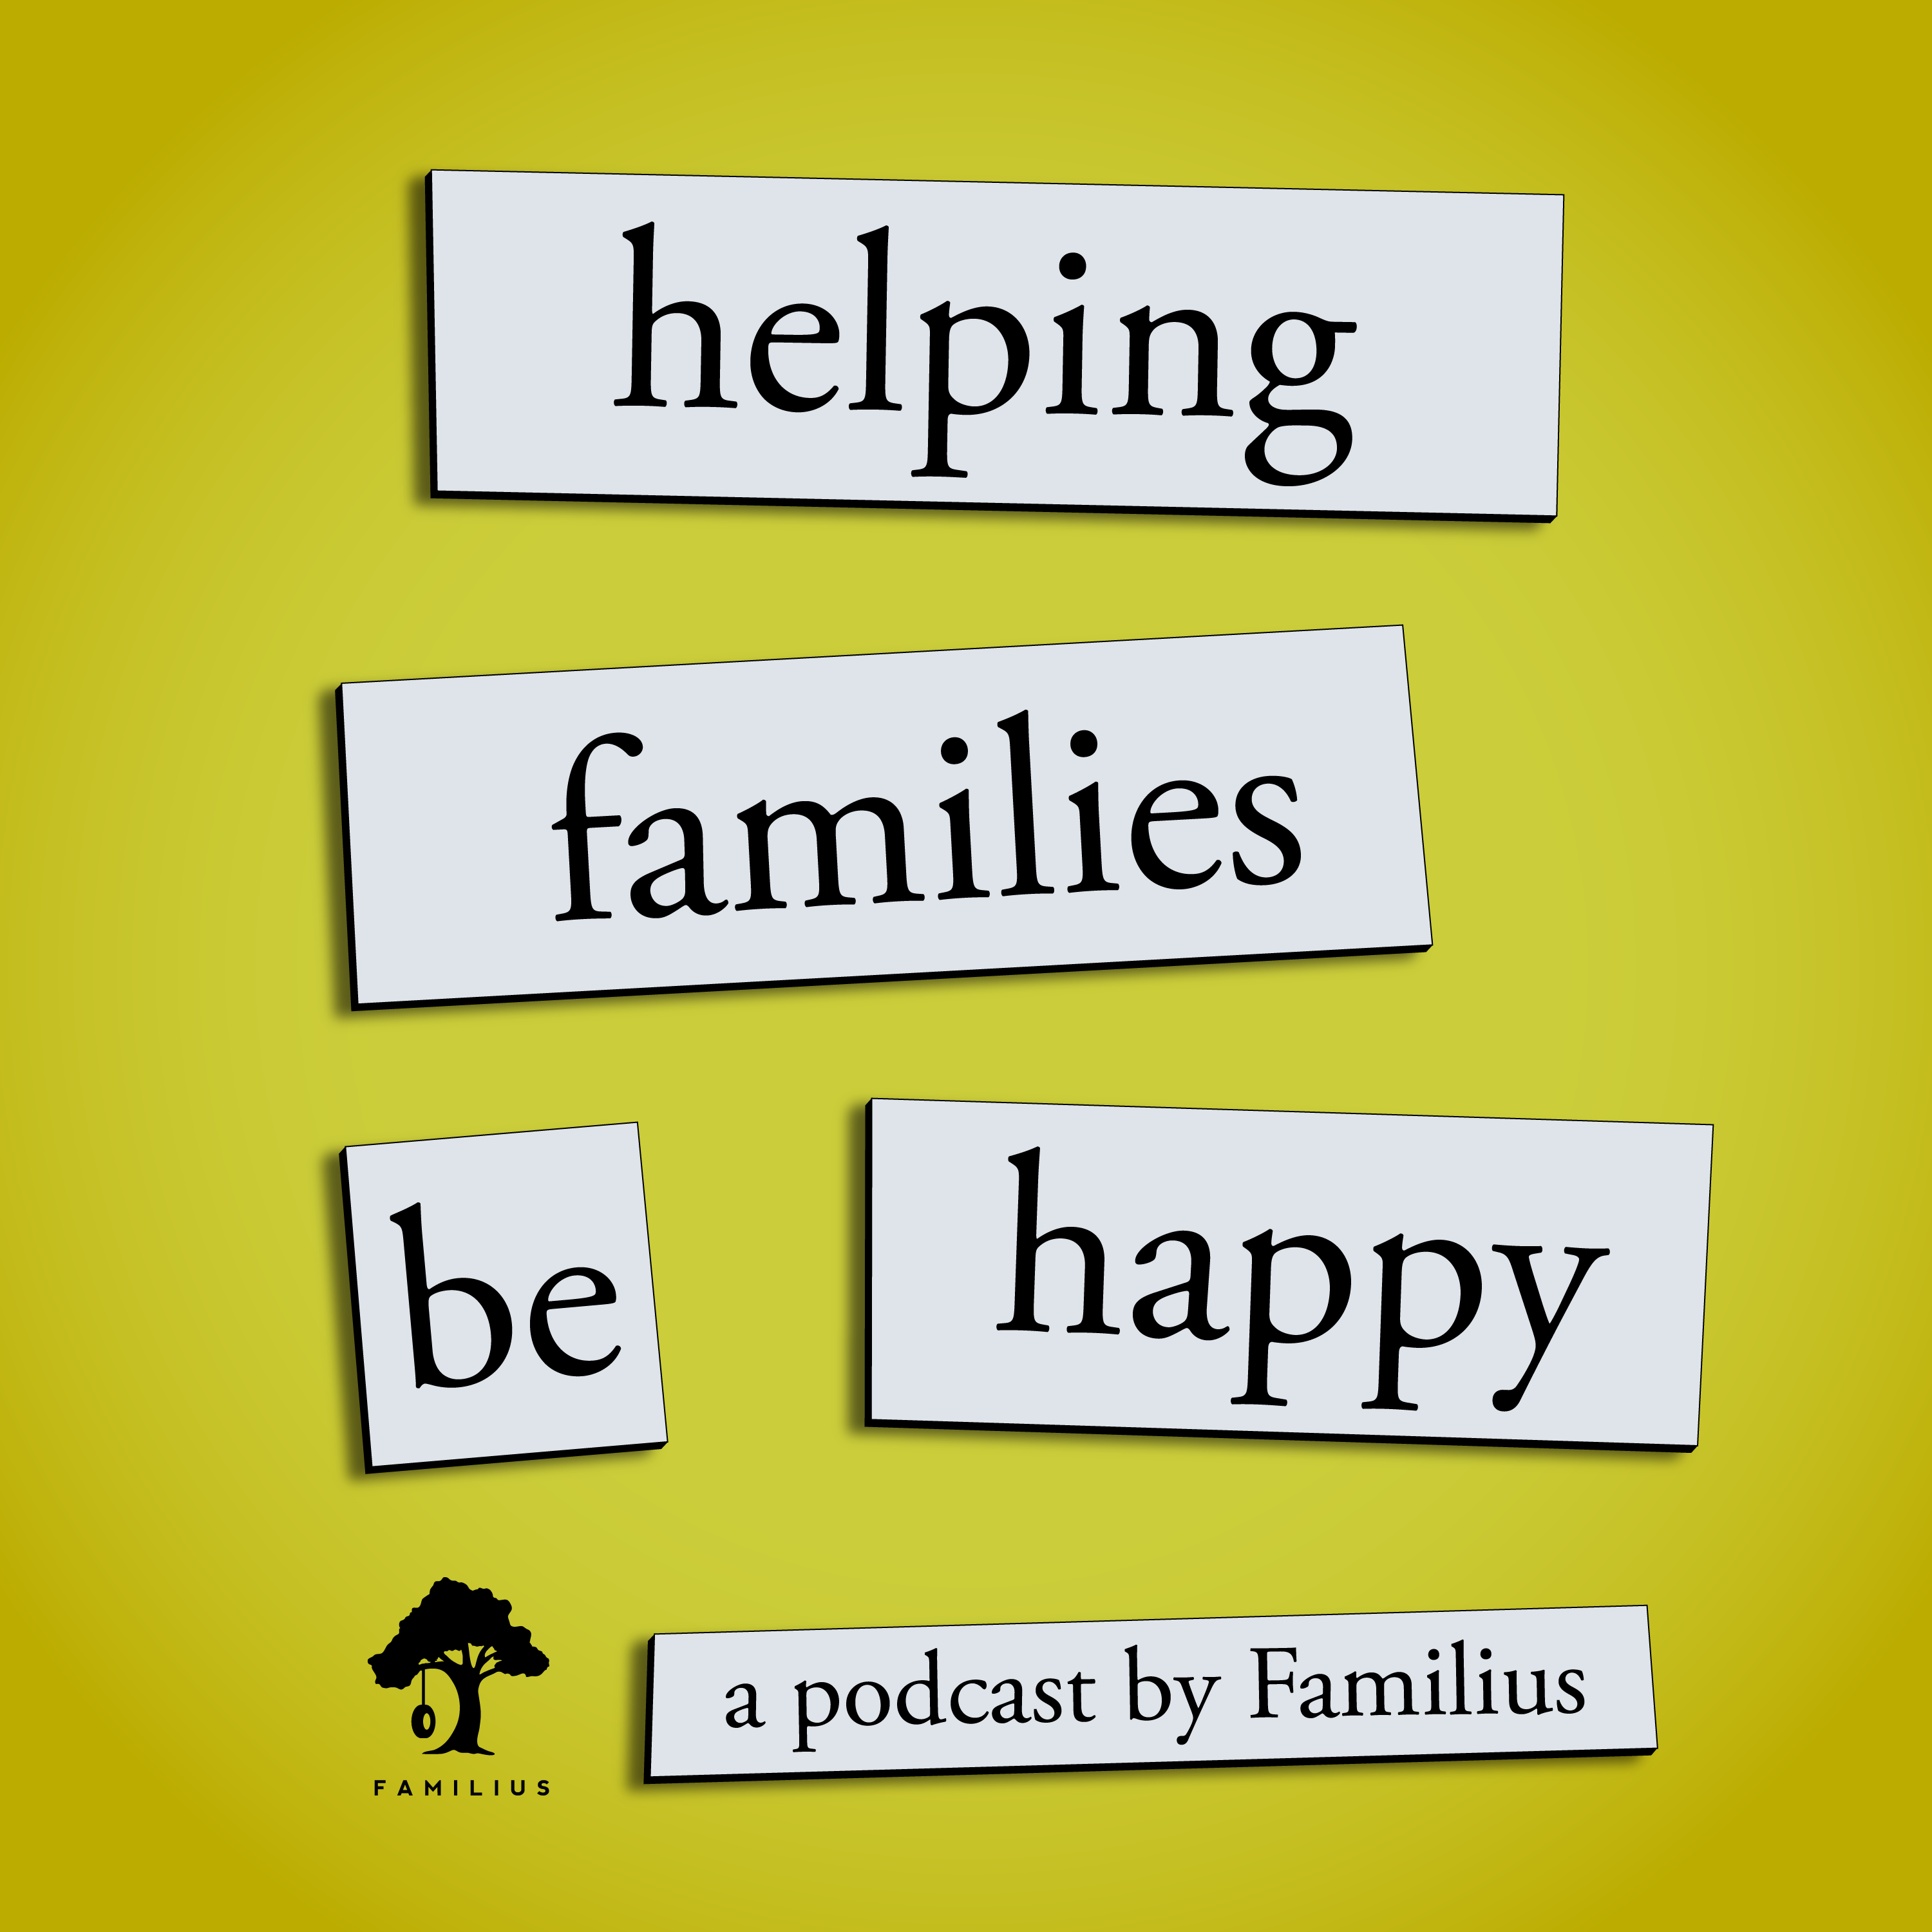 Yellow background with the Familiua logo. Text reads: Helping families be happy. A podcast by Familius.